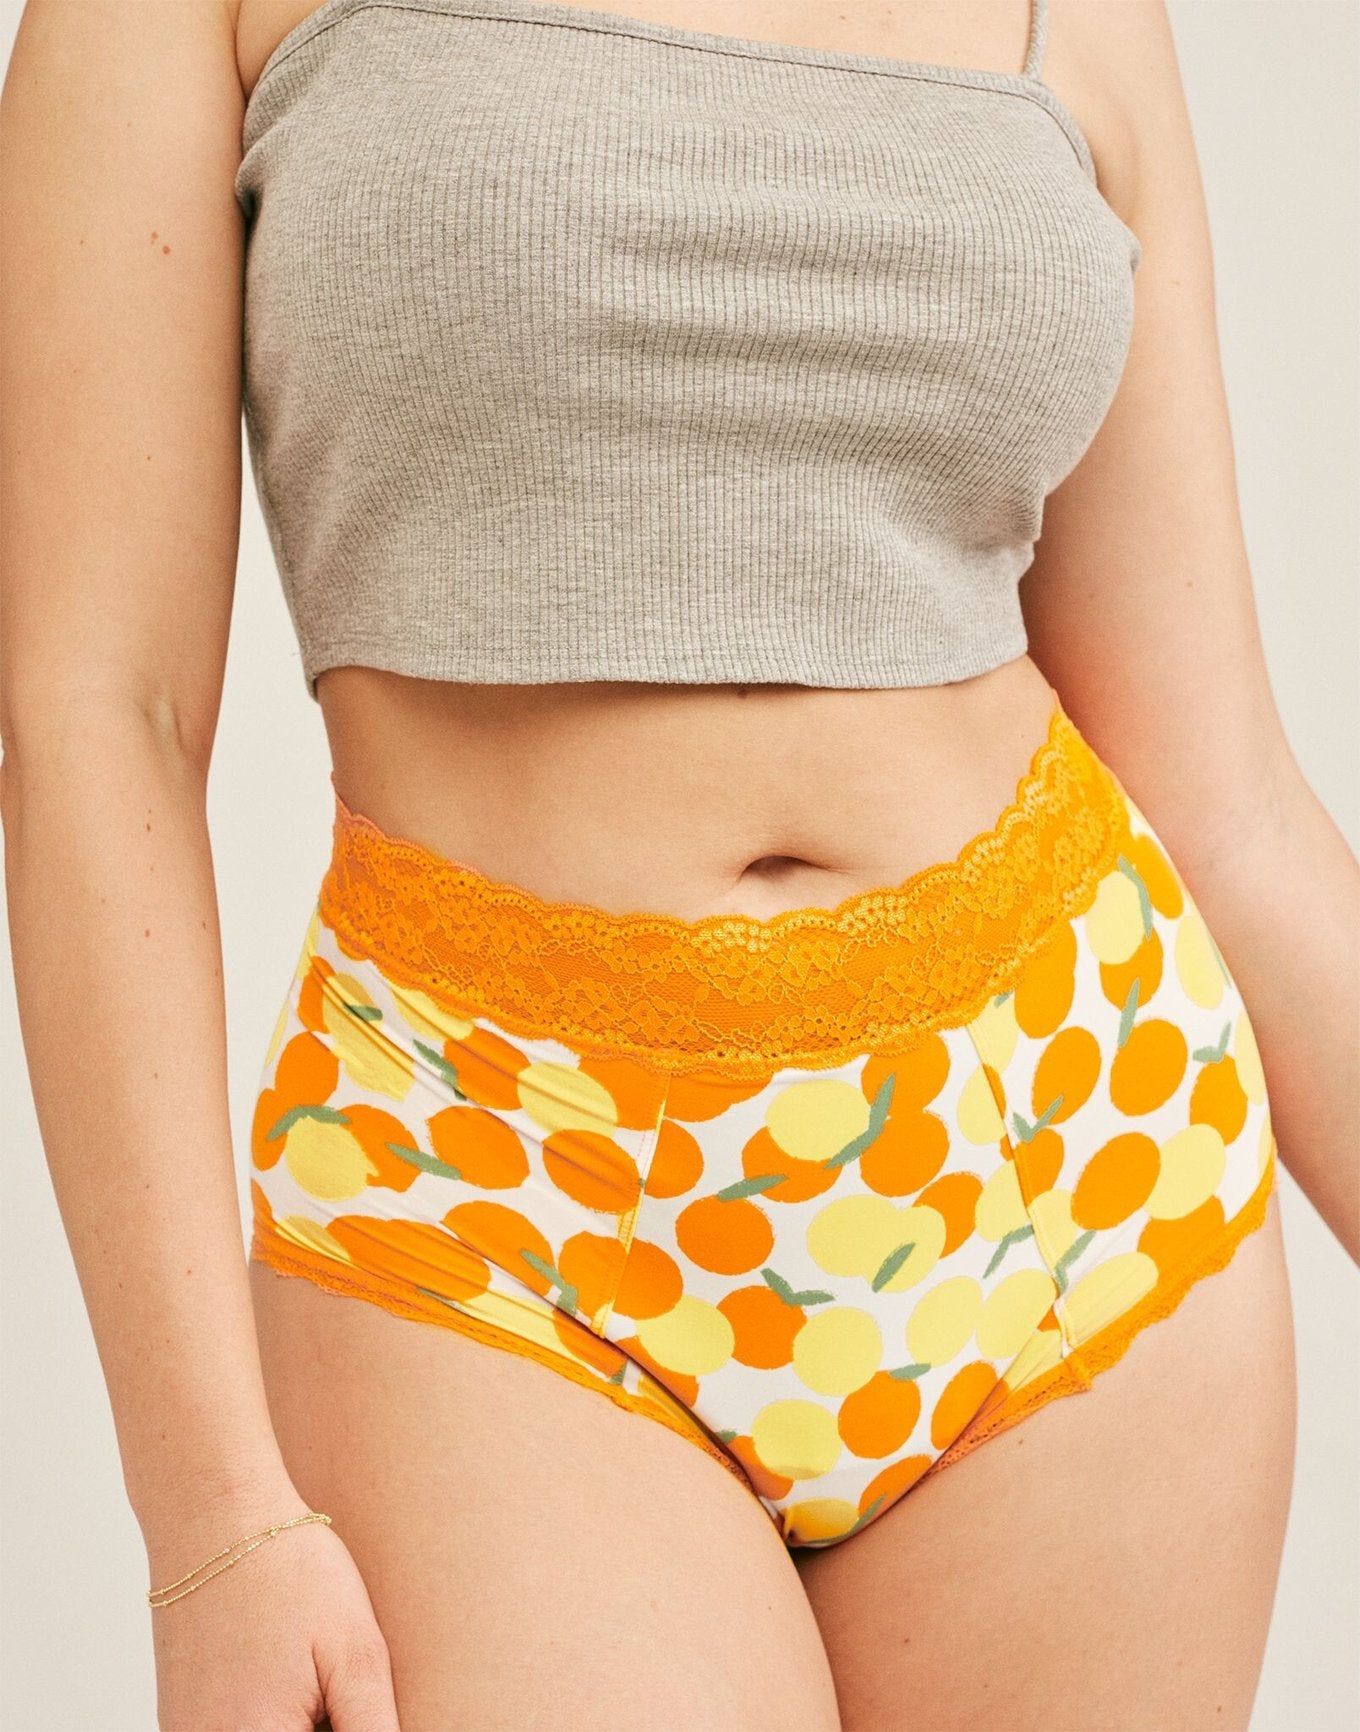 Joyja Amelia period-proof panty in color Zest of Life and shape high waisted